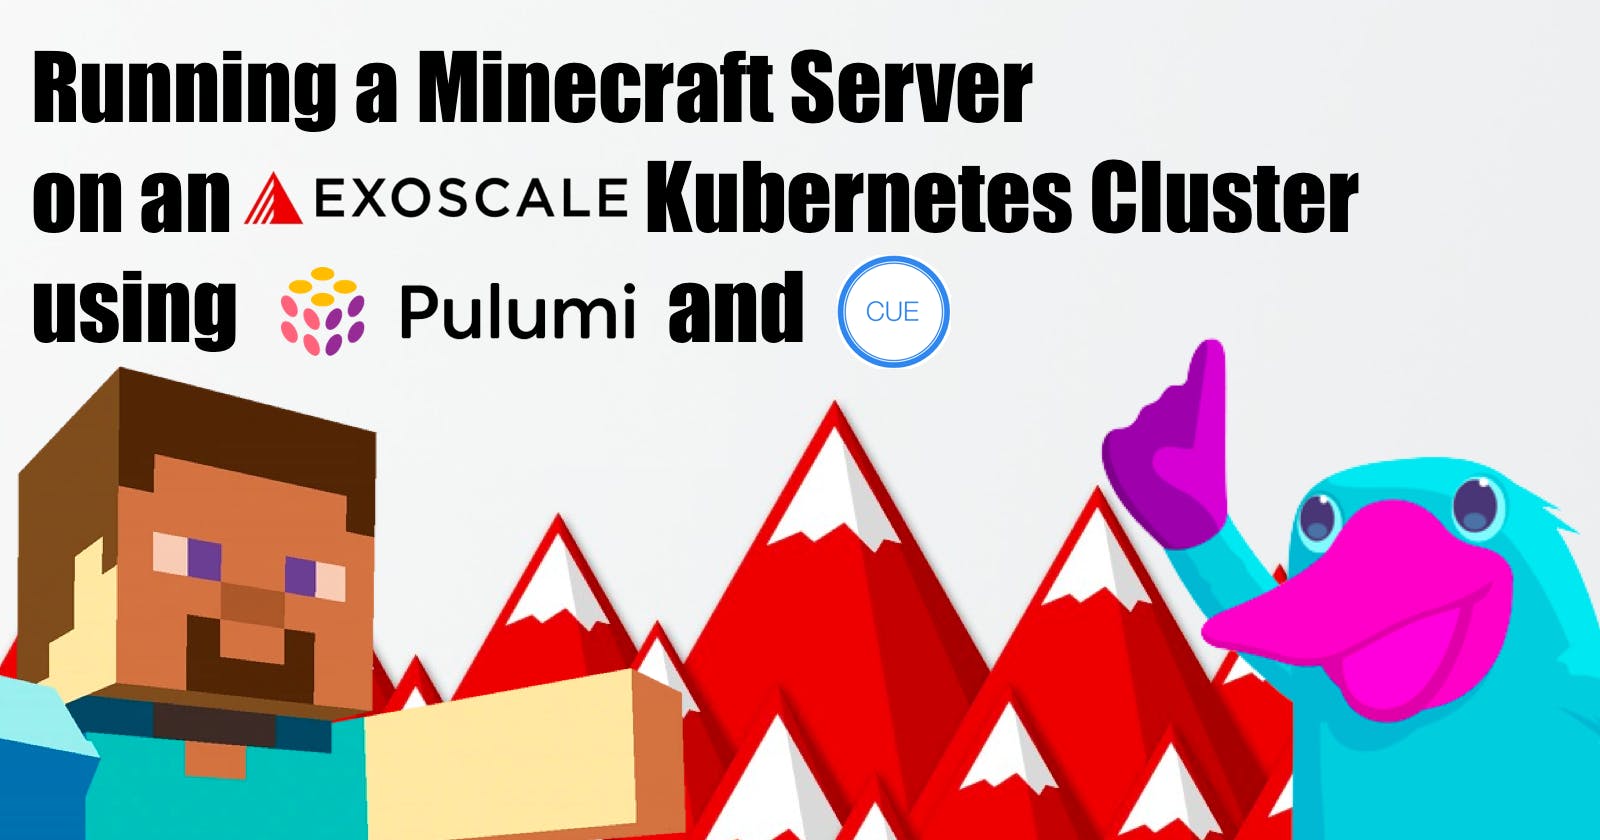 Running a Minecraft Server on an Exoscale Kubernetes Cluster using Pulumi and CUE